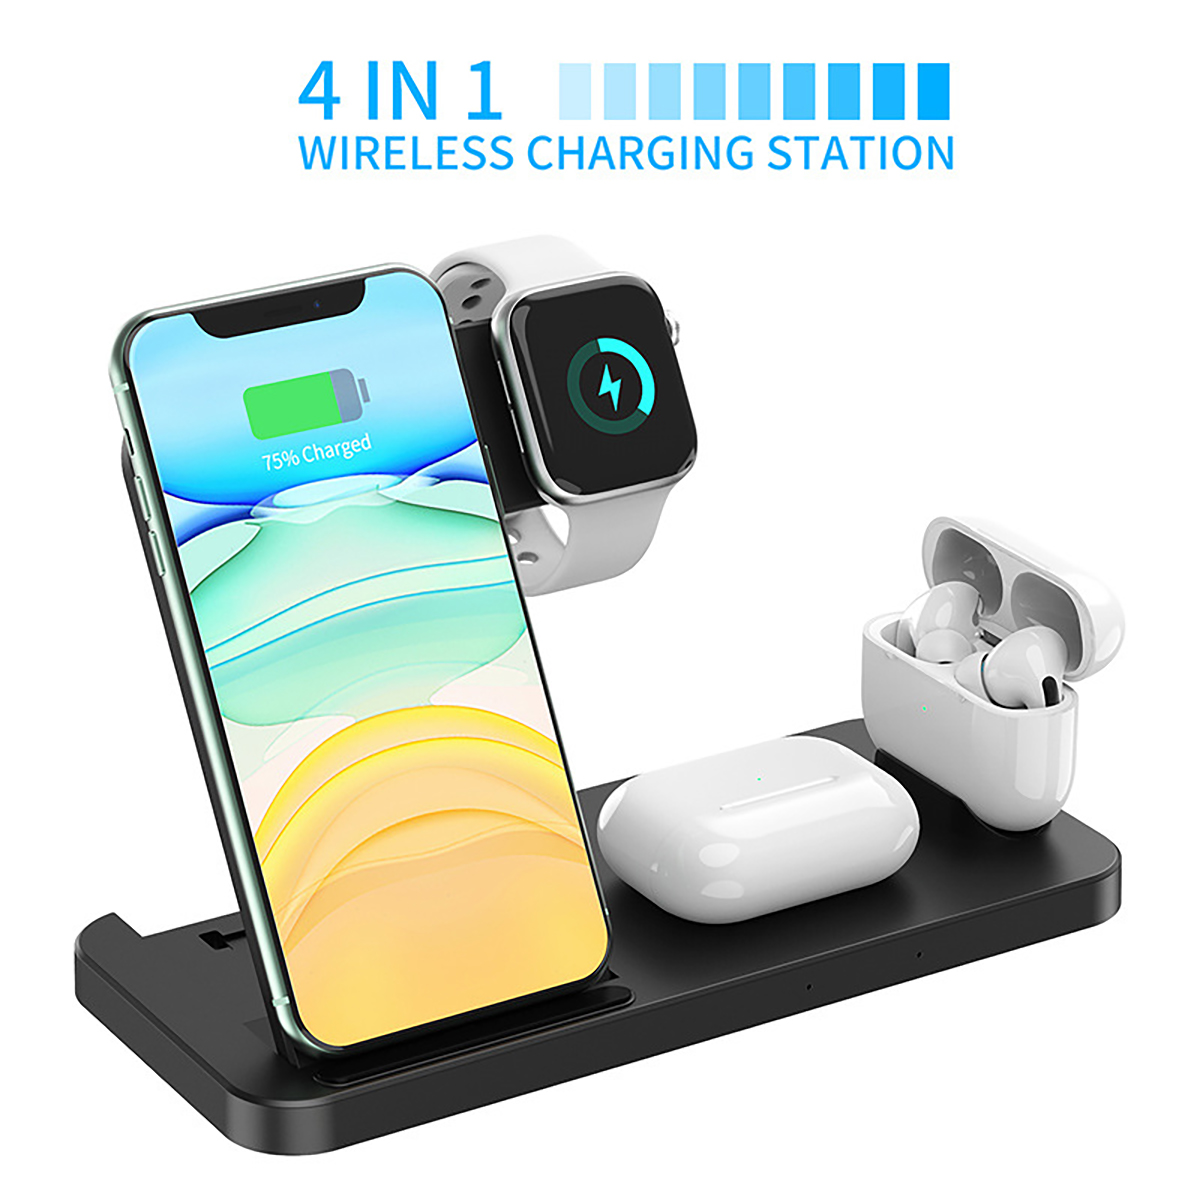 4-In-1-Wireless-Charging-Station-15W-Fast-Dock-Charger-Stand-Phone-Watch-Pods-Support-Wireless-Charg-1892157-1